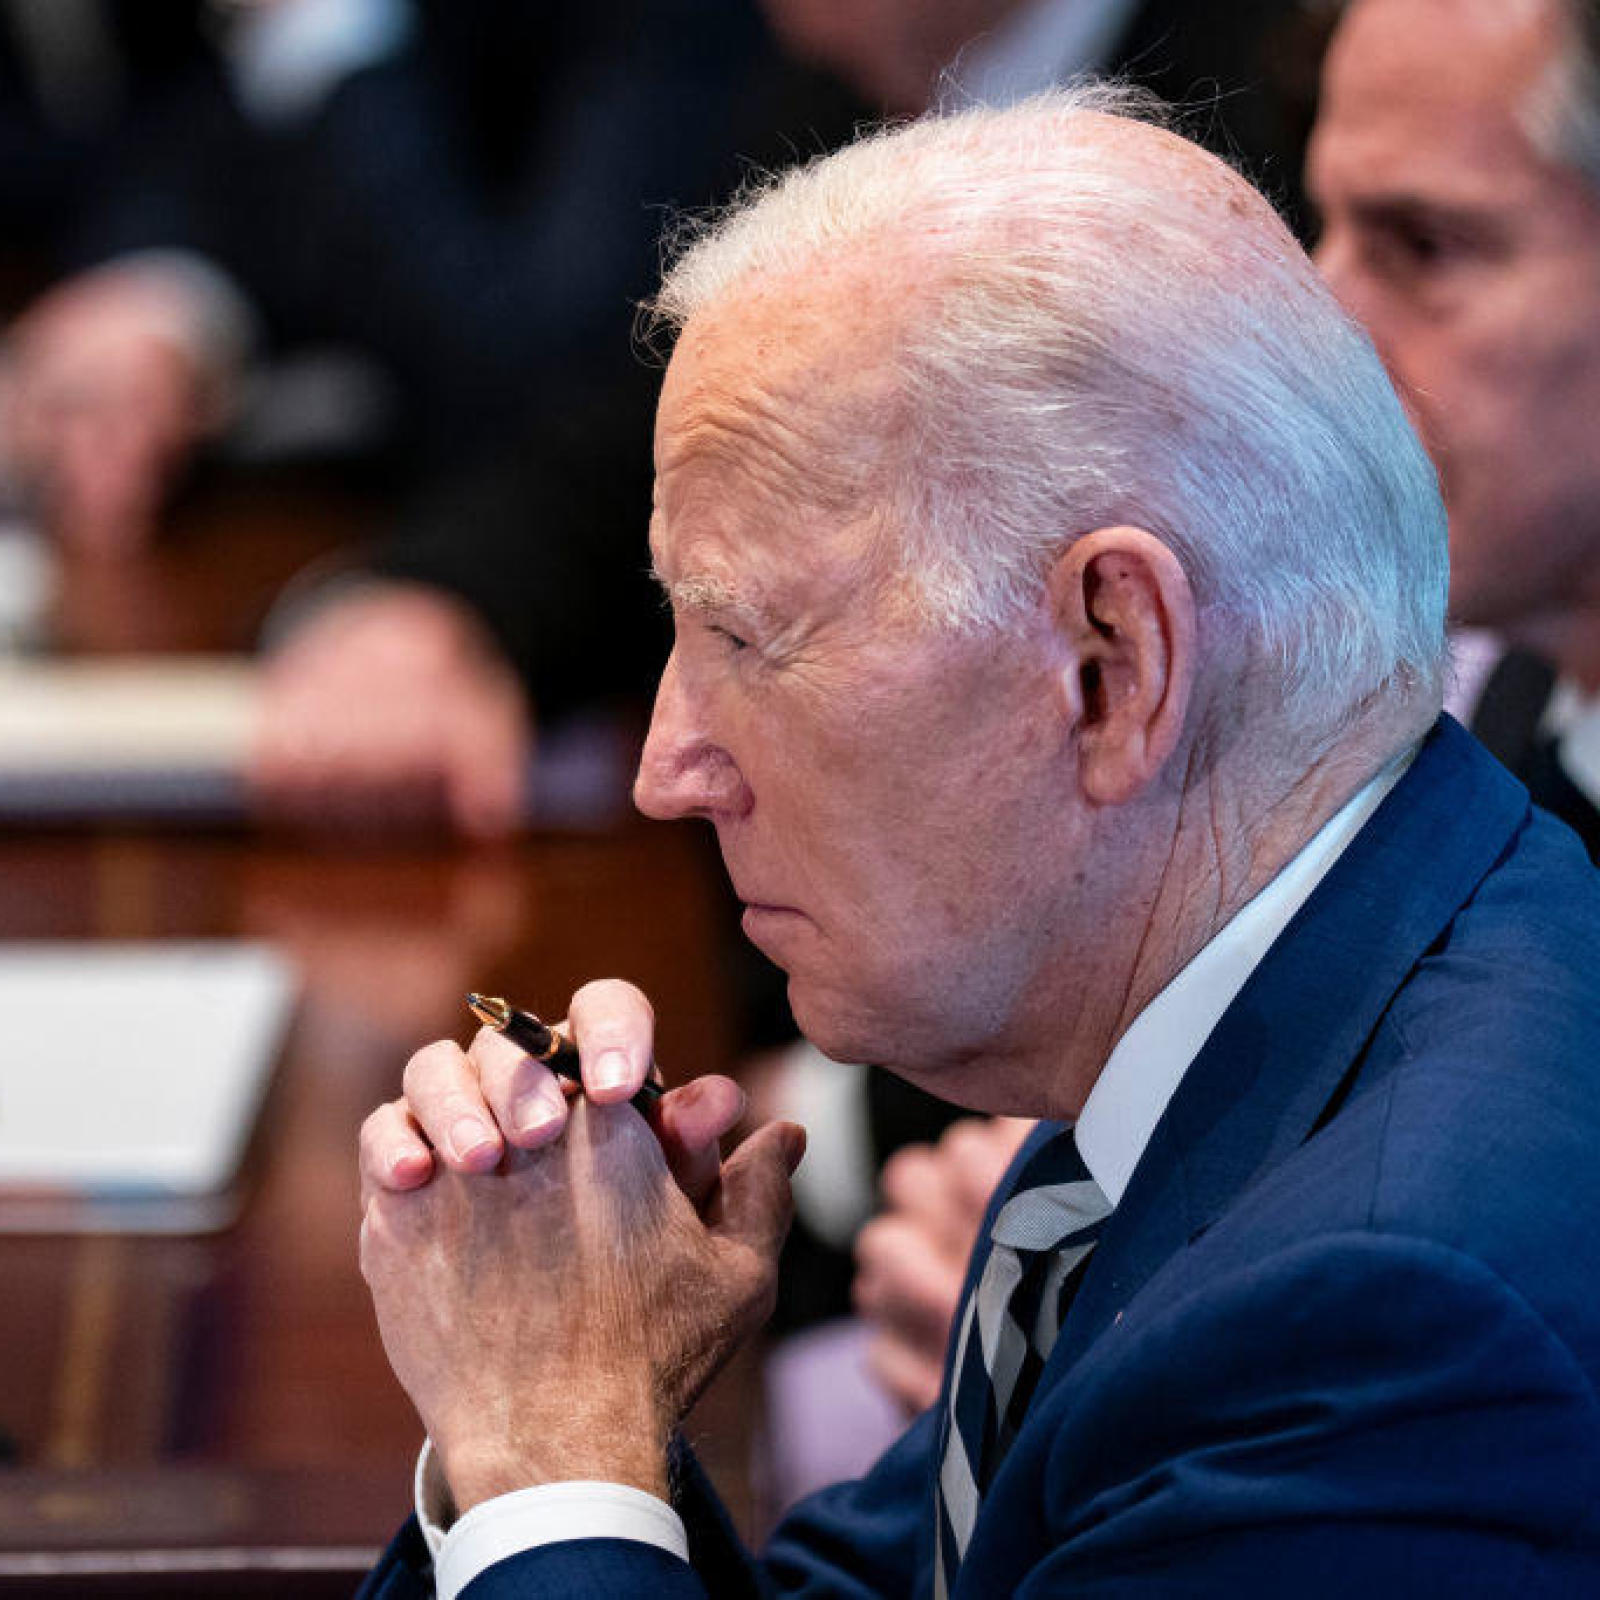 white house asked special counsel to revise descriptions of biden's memory